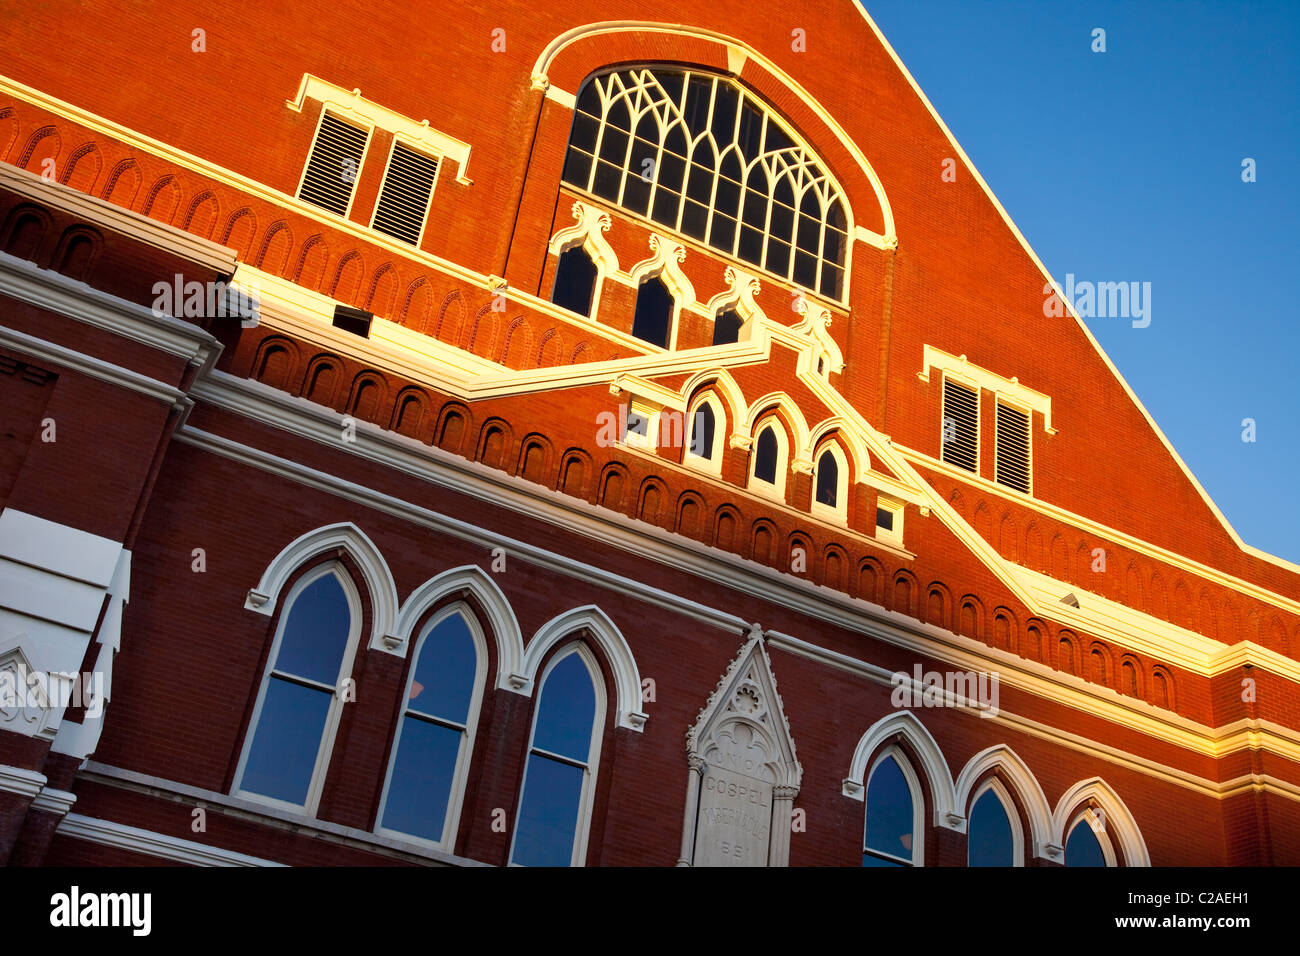 Glow of setting sun on the Ryman Auditorium (1891) - historic original home of the Grand Ole Opry, Nashville Tennessee USA Stock Photo